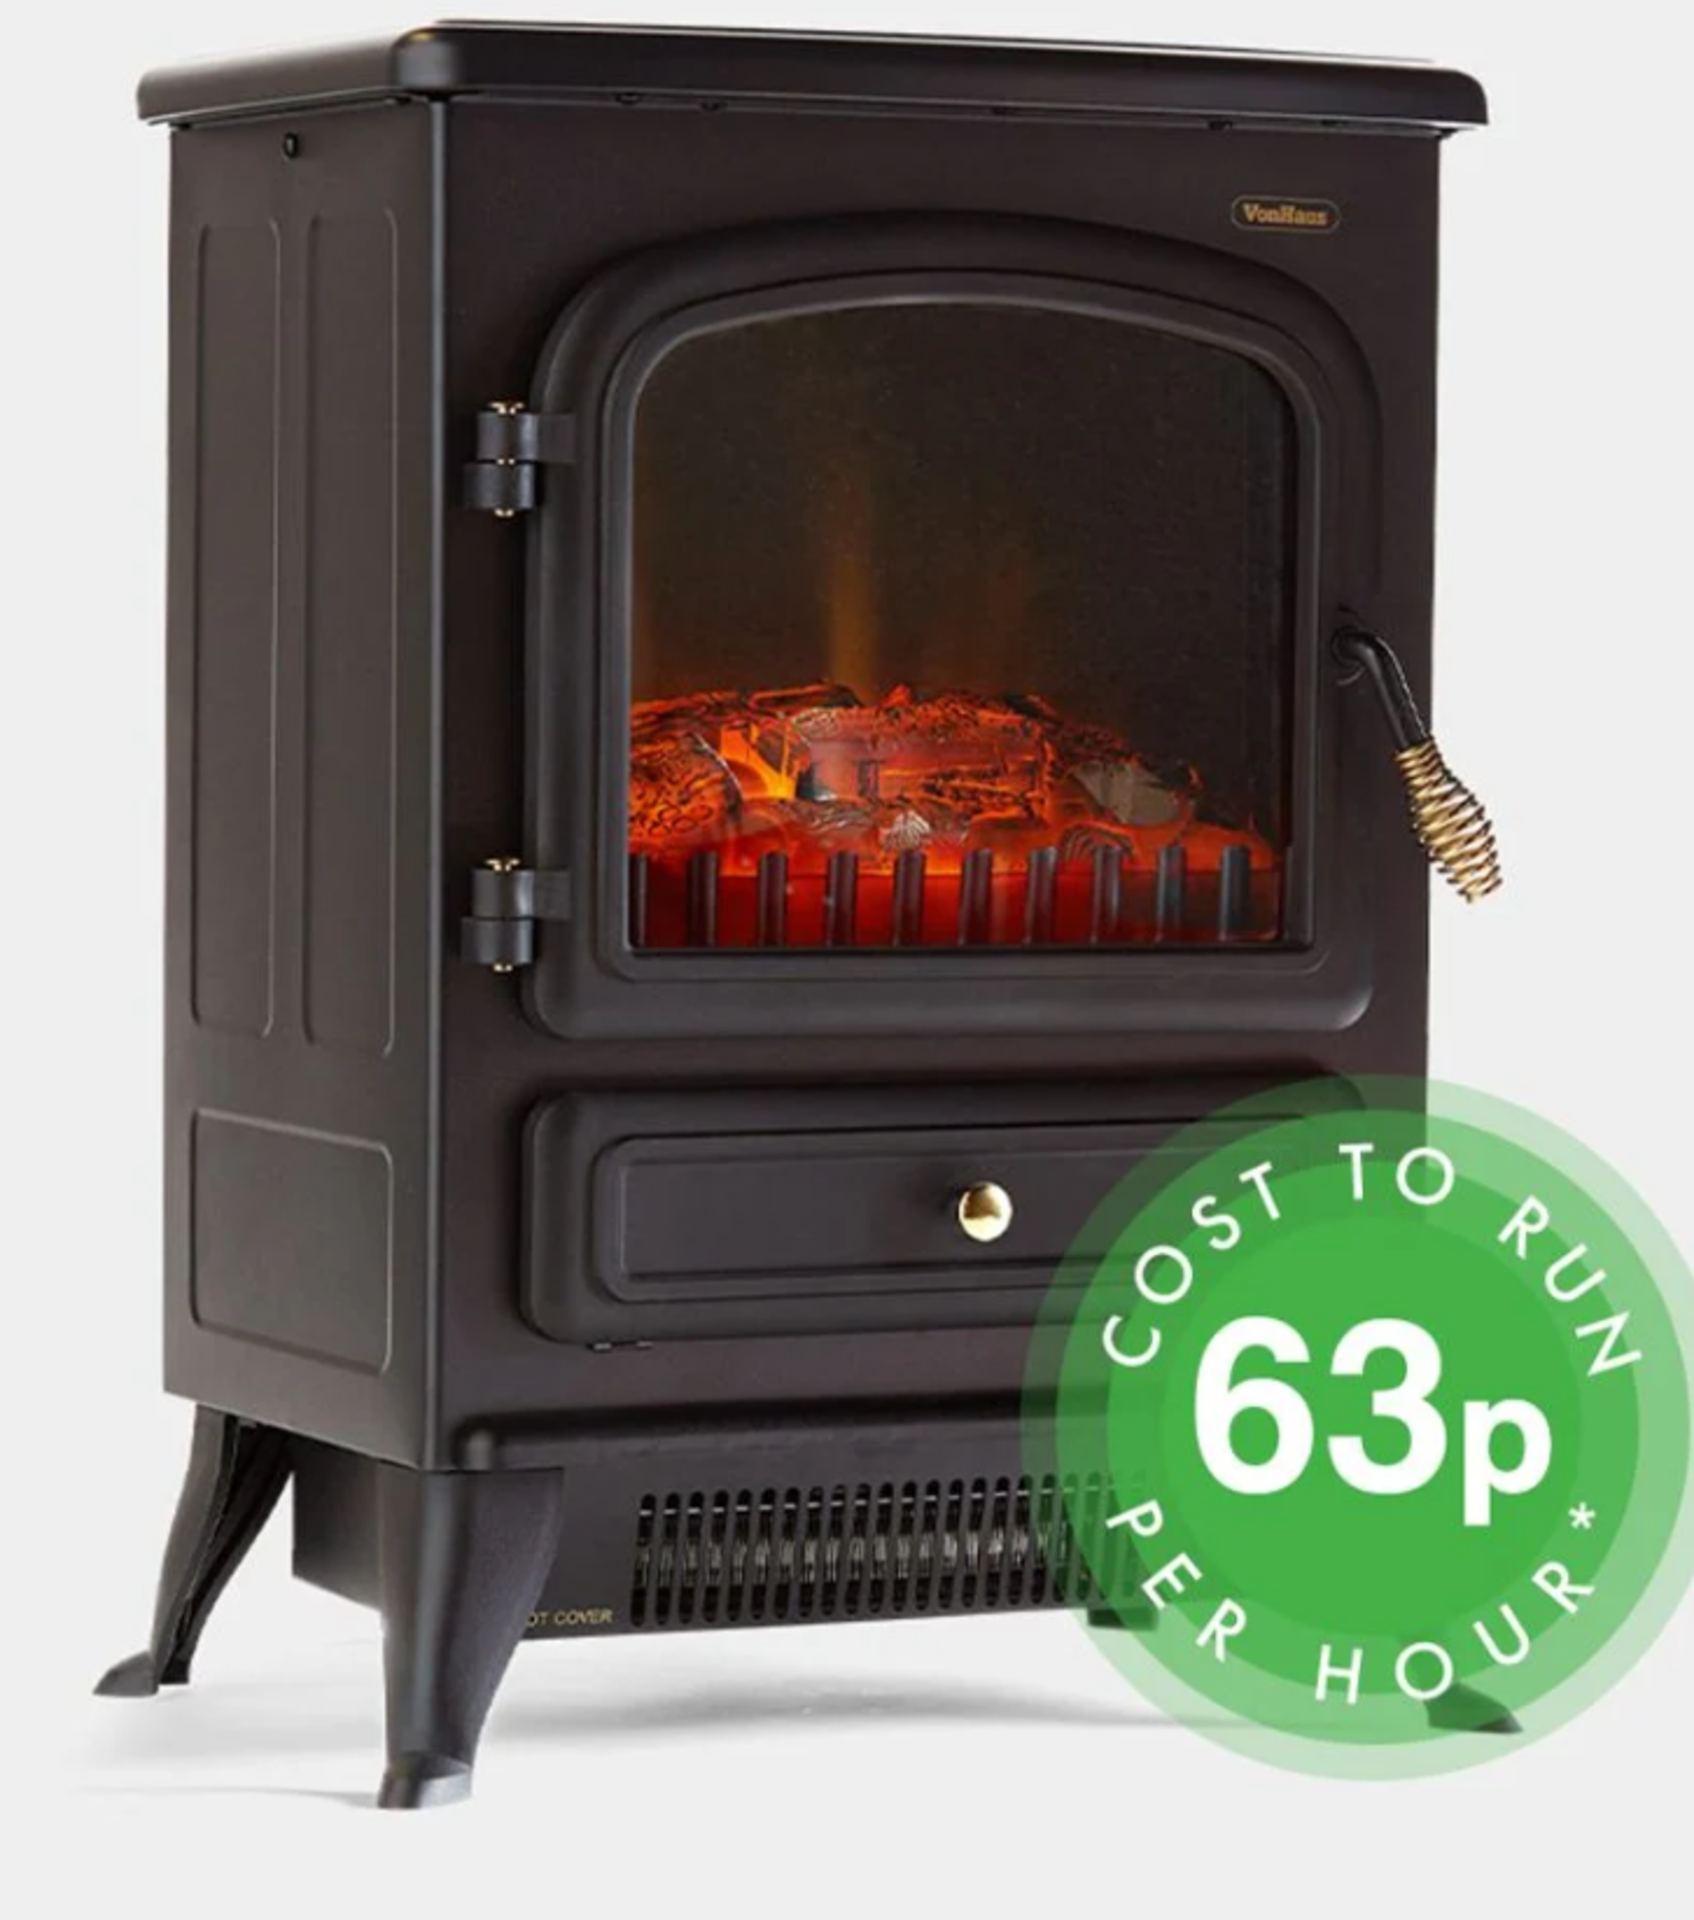 1850W Small Black Stove Heater. The electric fire heats rooms up to 53m² and benefits from two